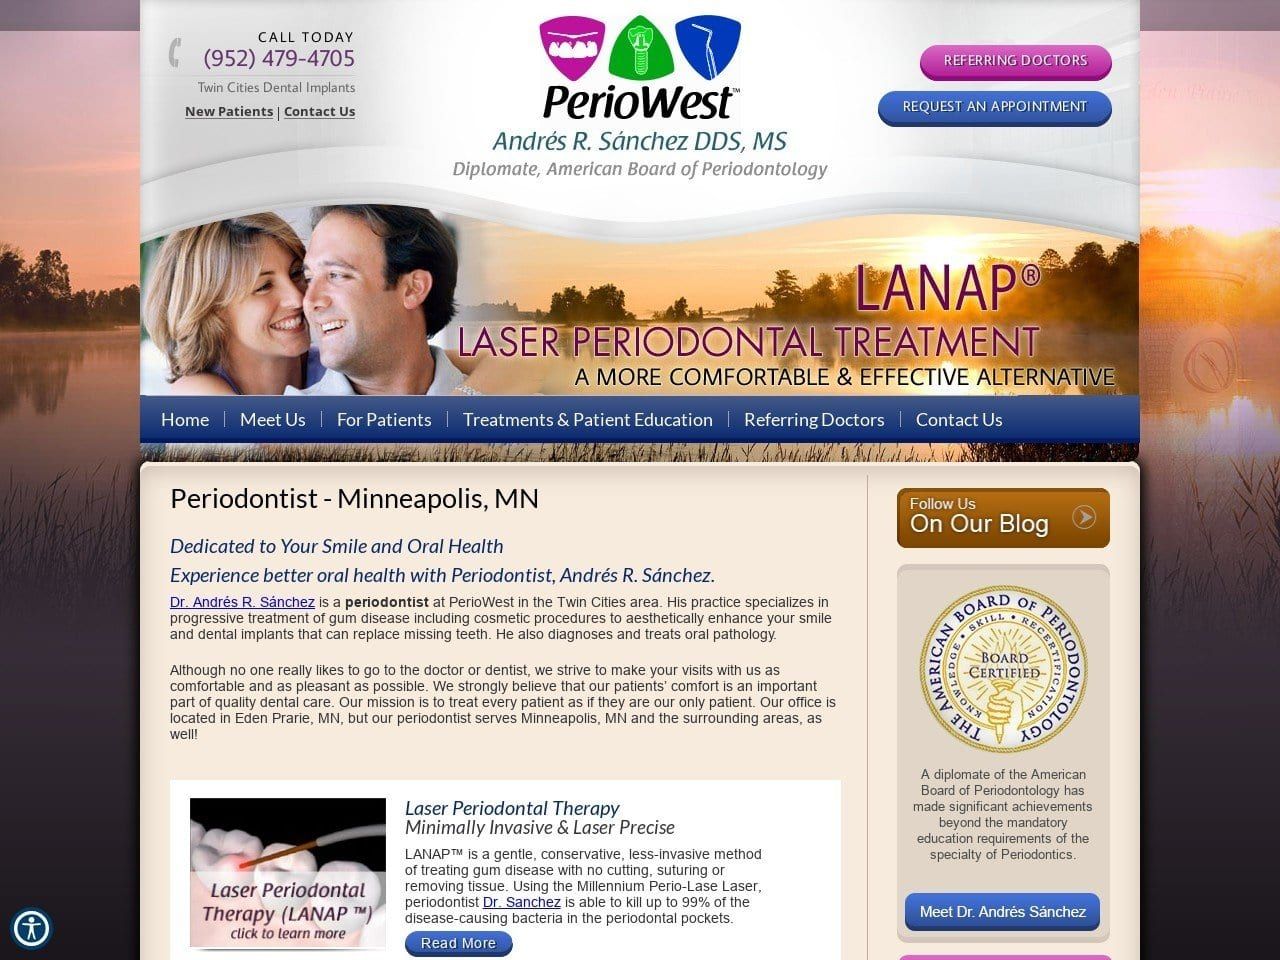 PerioWest Andres R. Sanchez DDS MS Diplomate ABP Website Screenshot from periowestmn.com